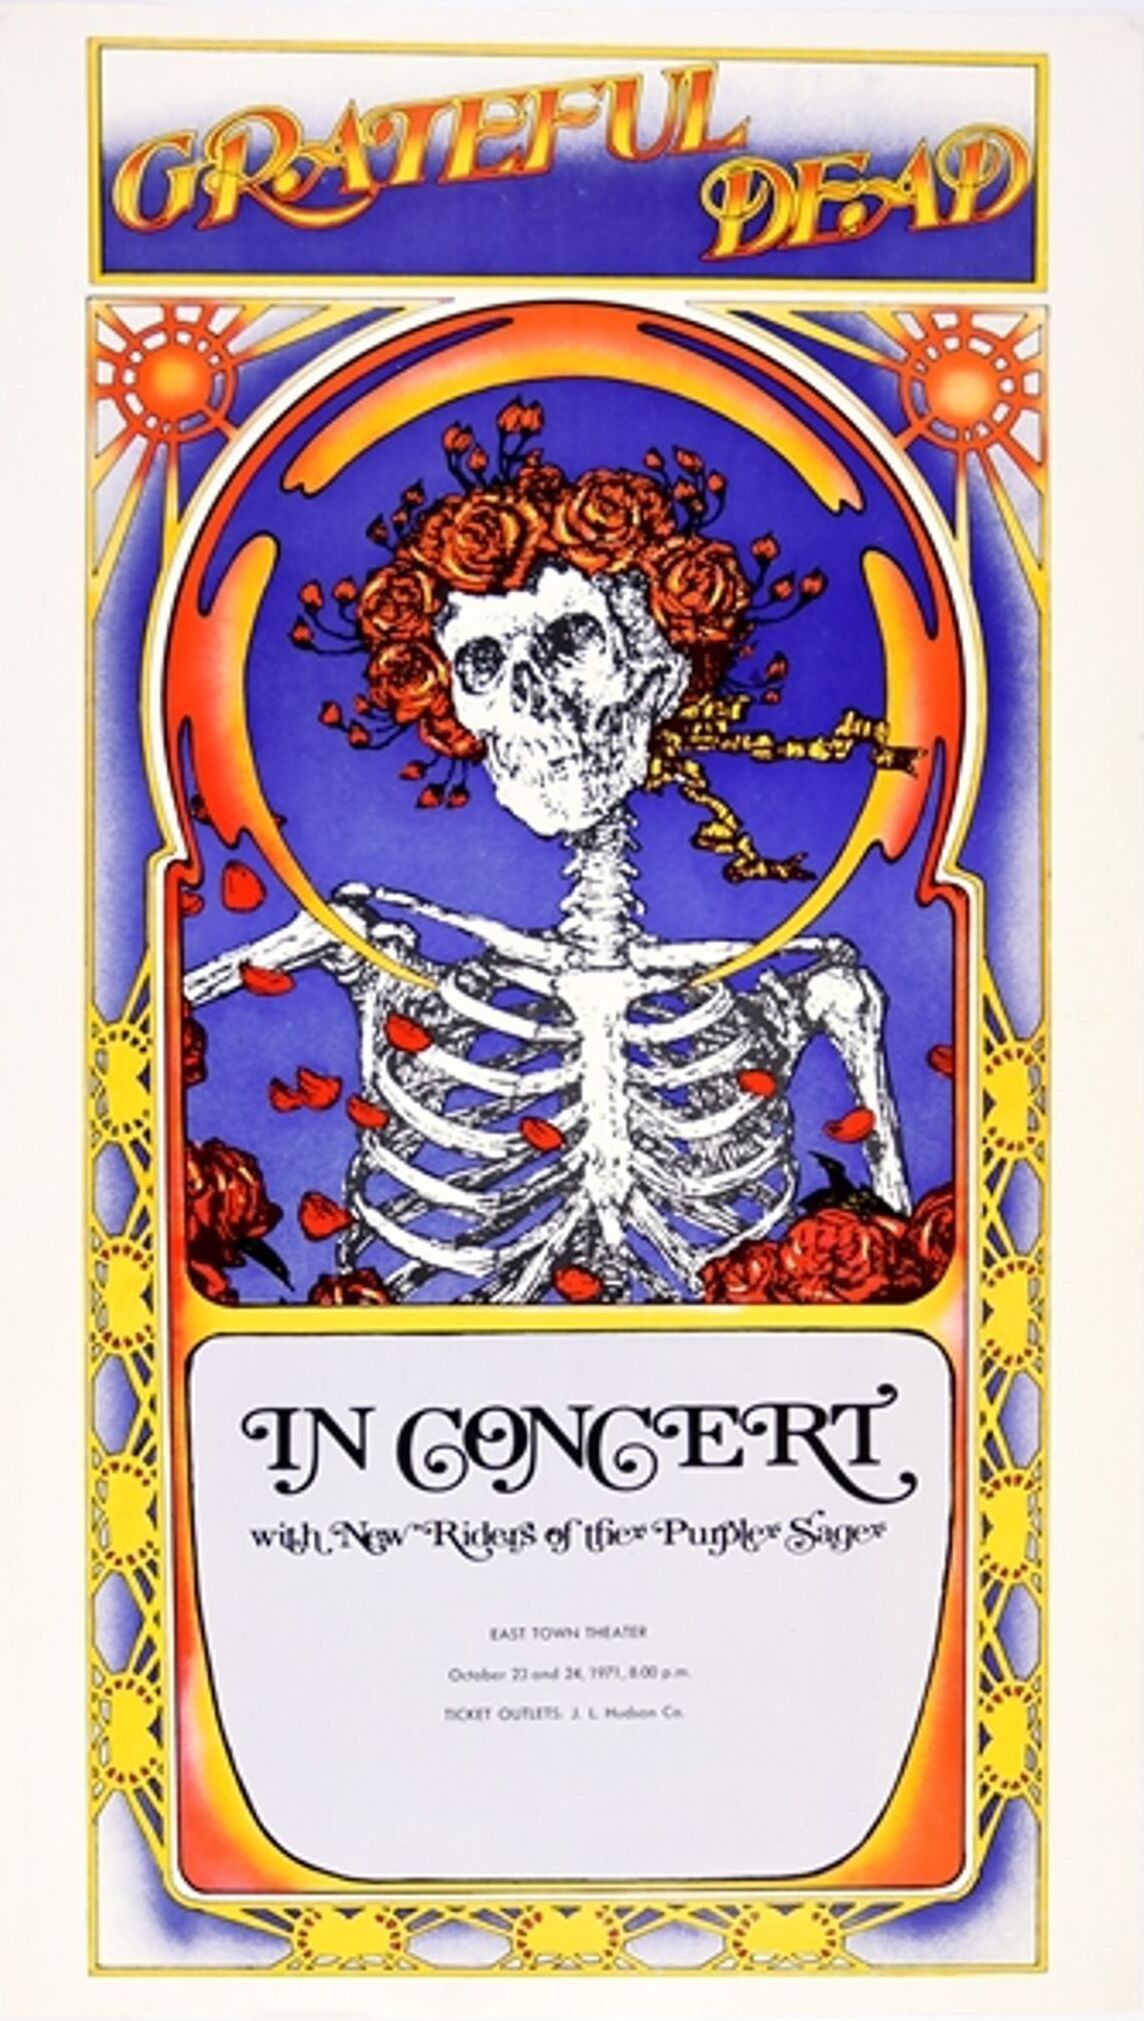 Grateful Dead East Town Theater 1971 Concert Poster